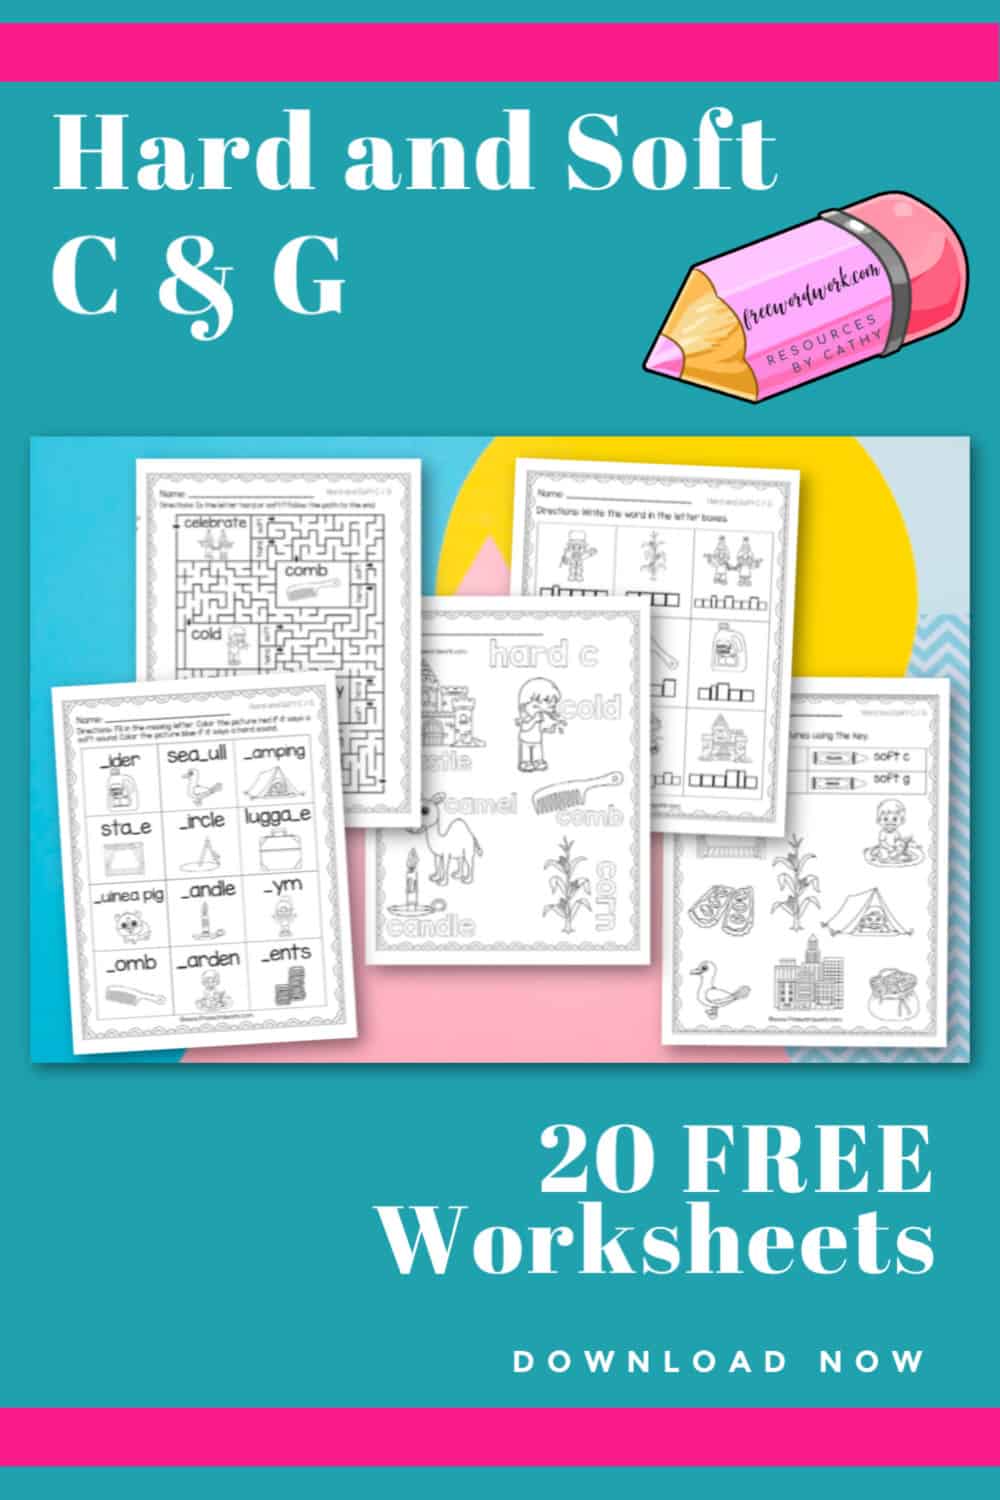 2nd-grade-phonics-worksheets-hard-and-soft-g-c-lucky-little-learners